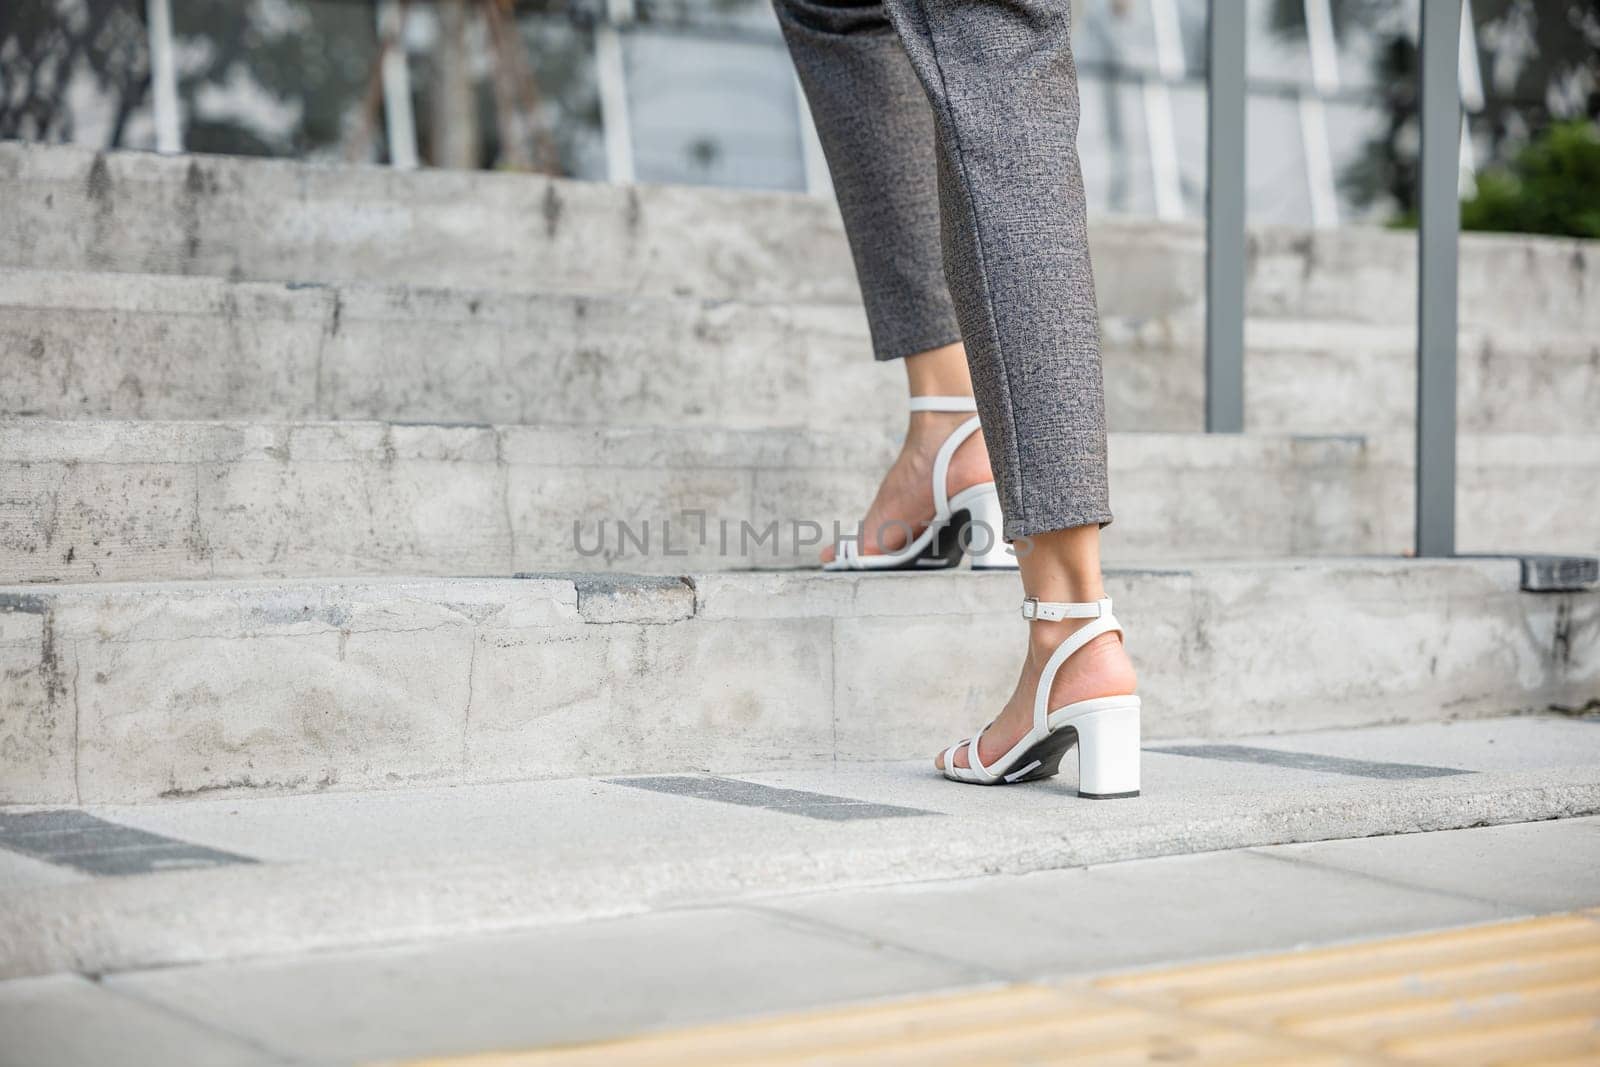 During the morning rush to the office businesswoman legs in motion are focused on climbing the stairs. This closeup captures the essence of progress, ambition, and the dedication of a modern manager. by Sorapop